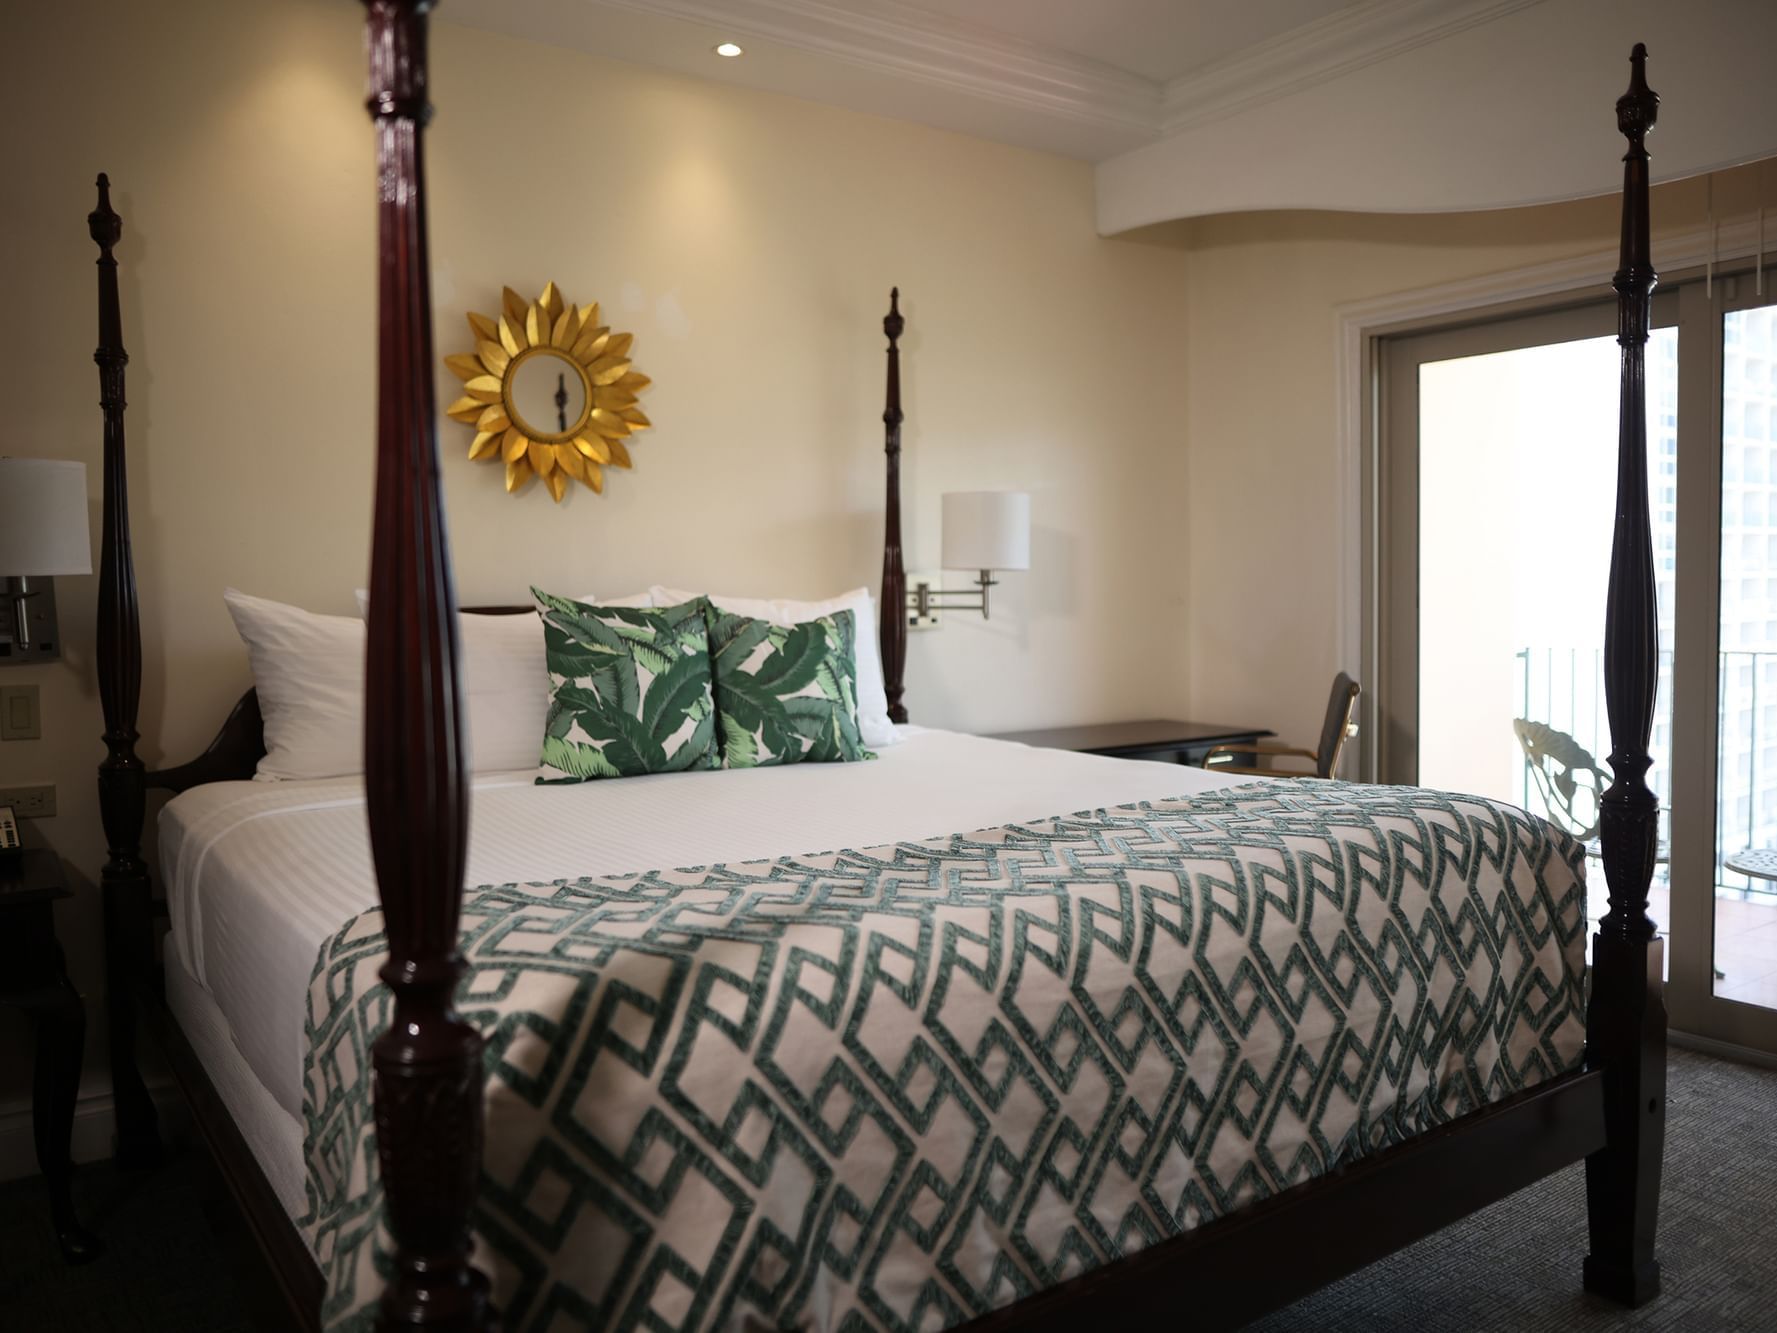 King-size bed by the balcony view in the Penthouse Deluxe at Courtleigh Hotel and Suites